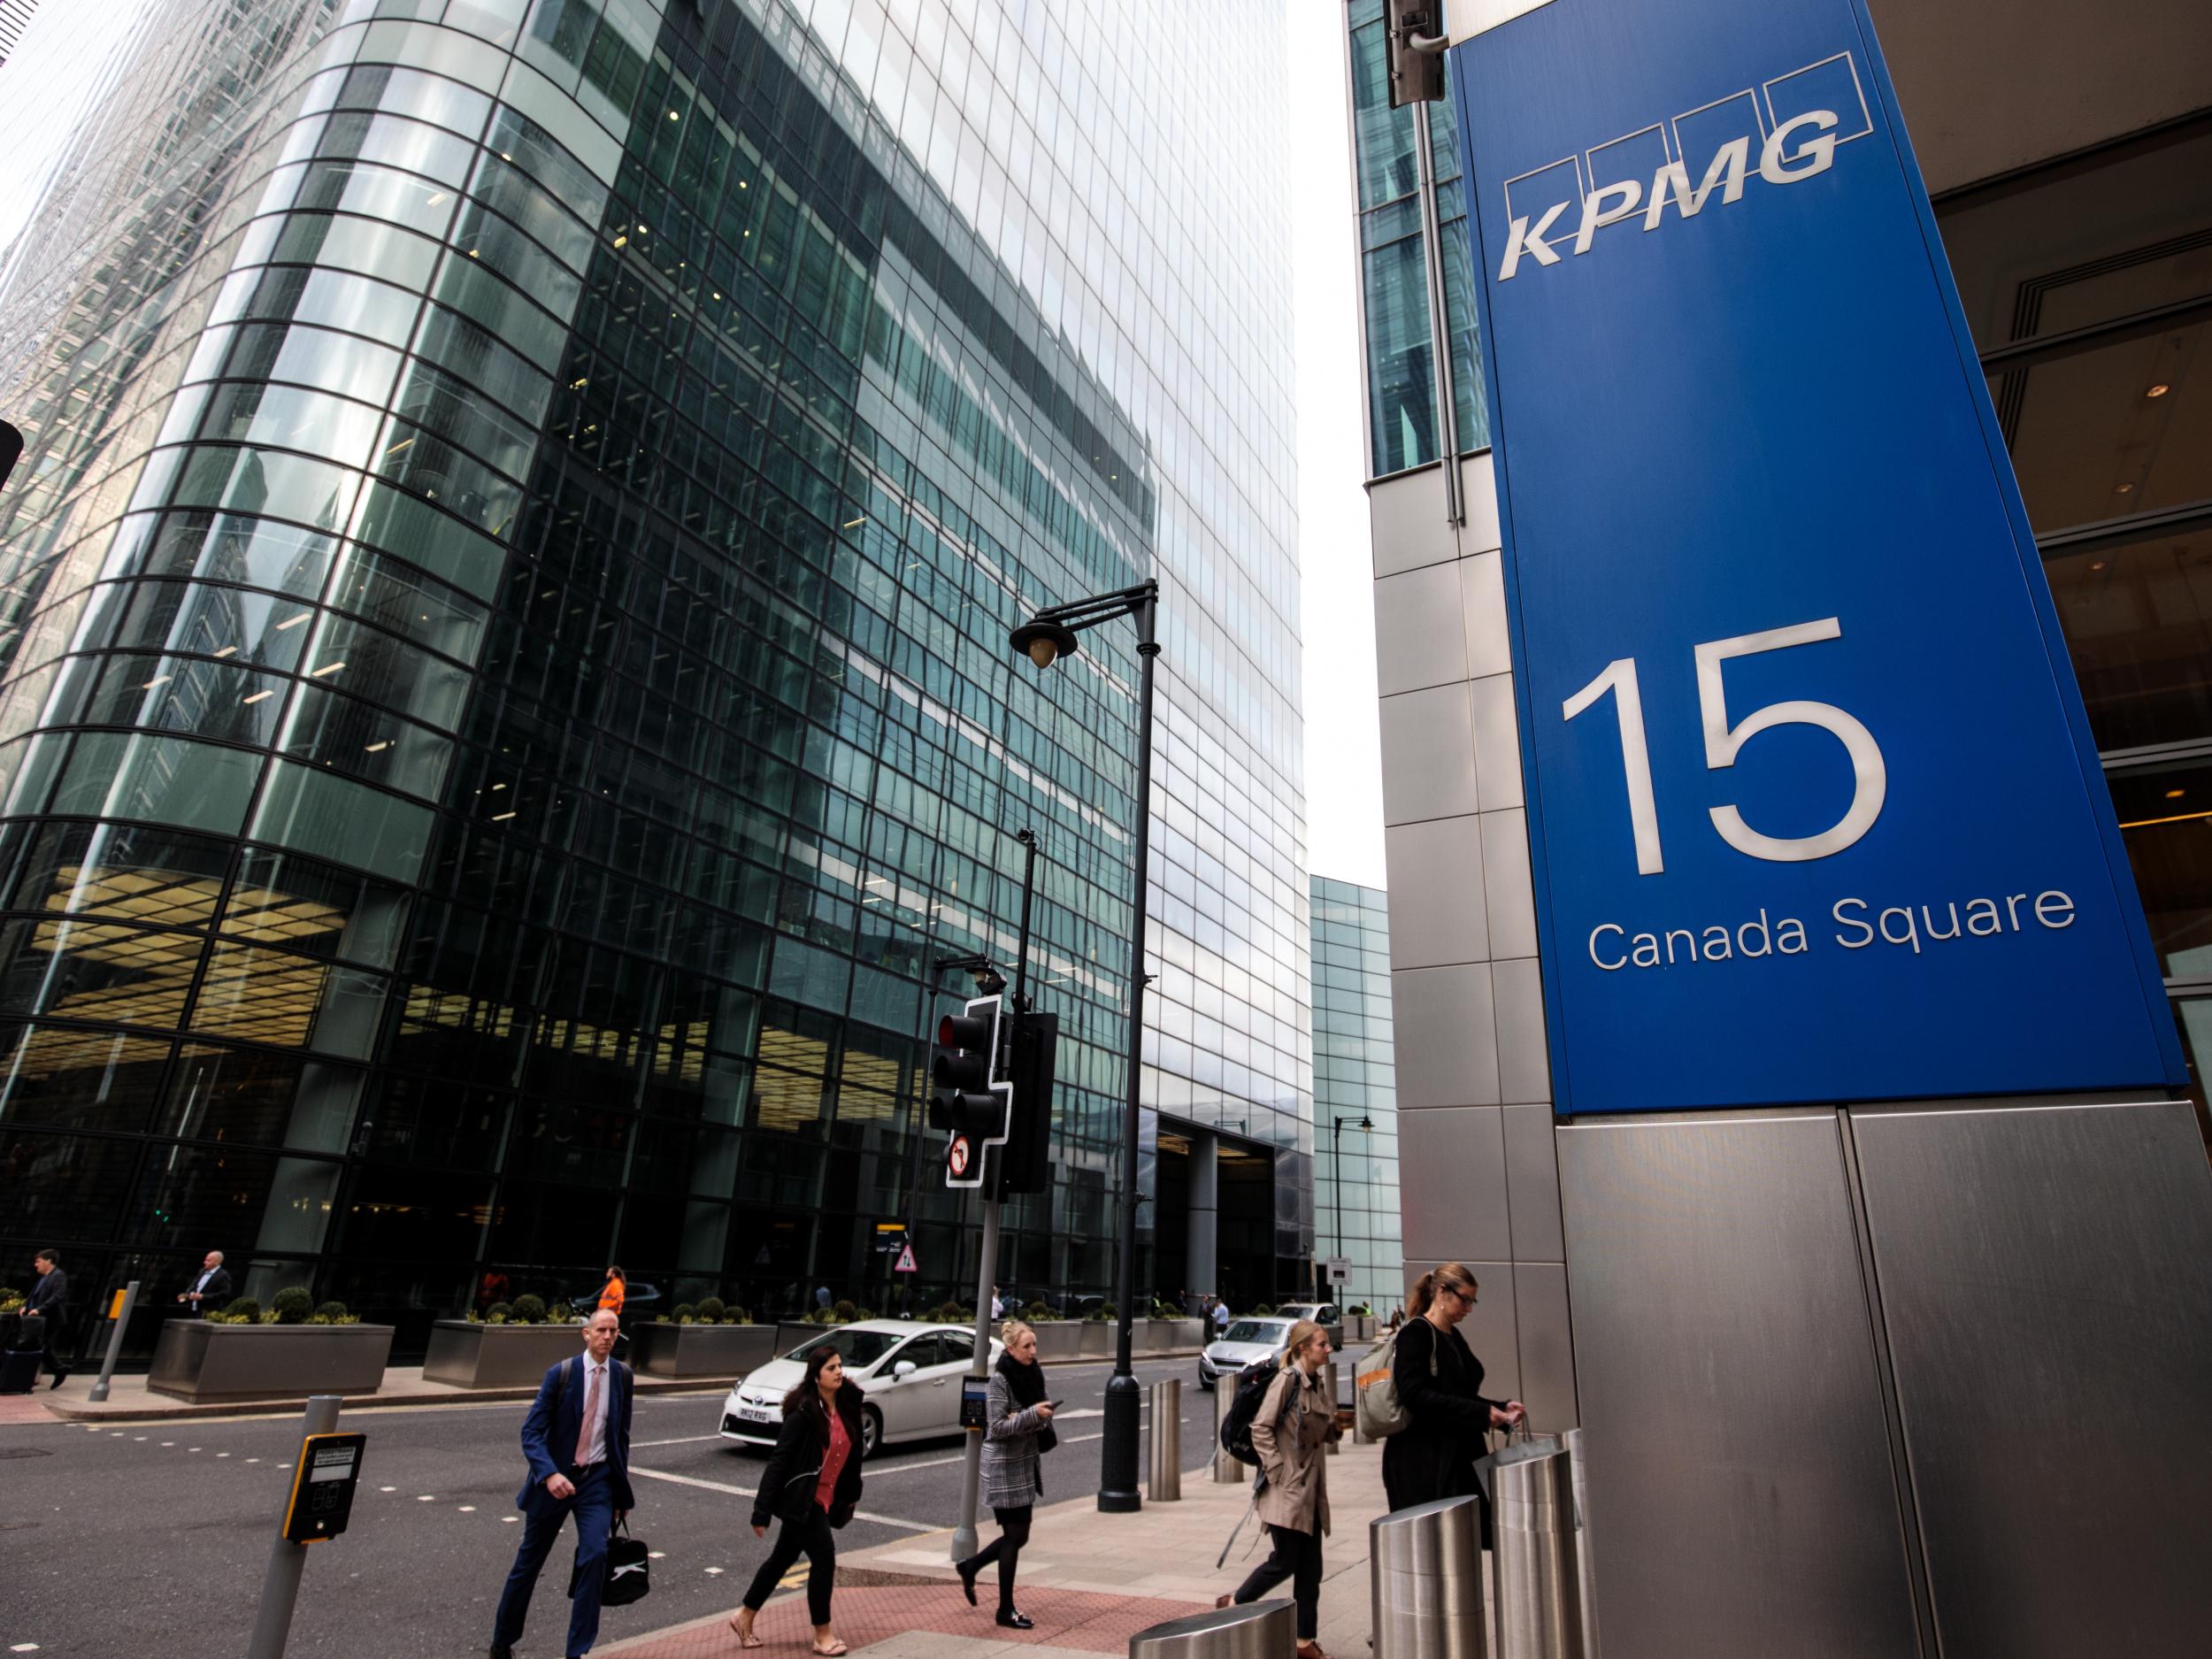 KPMG audited construction giant Carillion, which collapsed last year